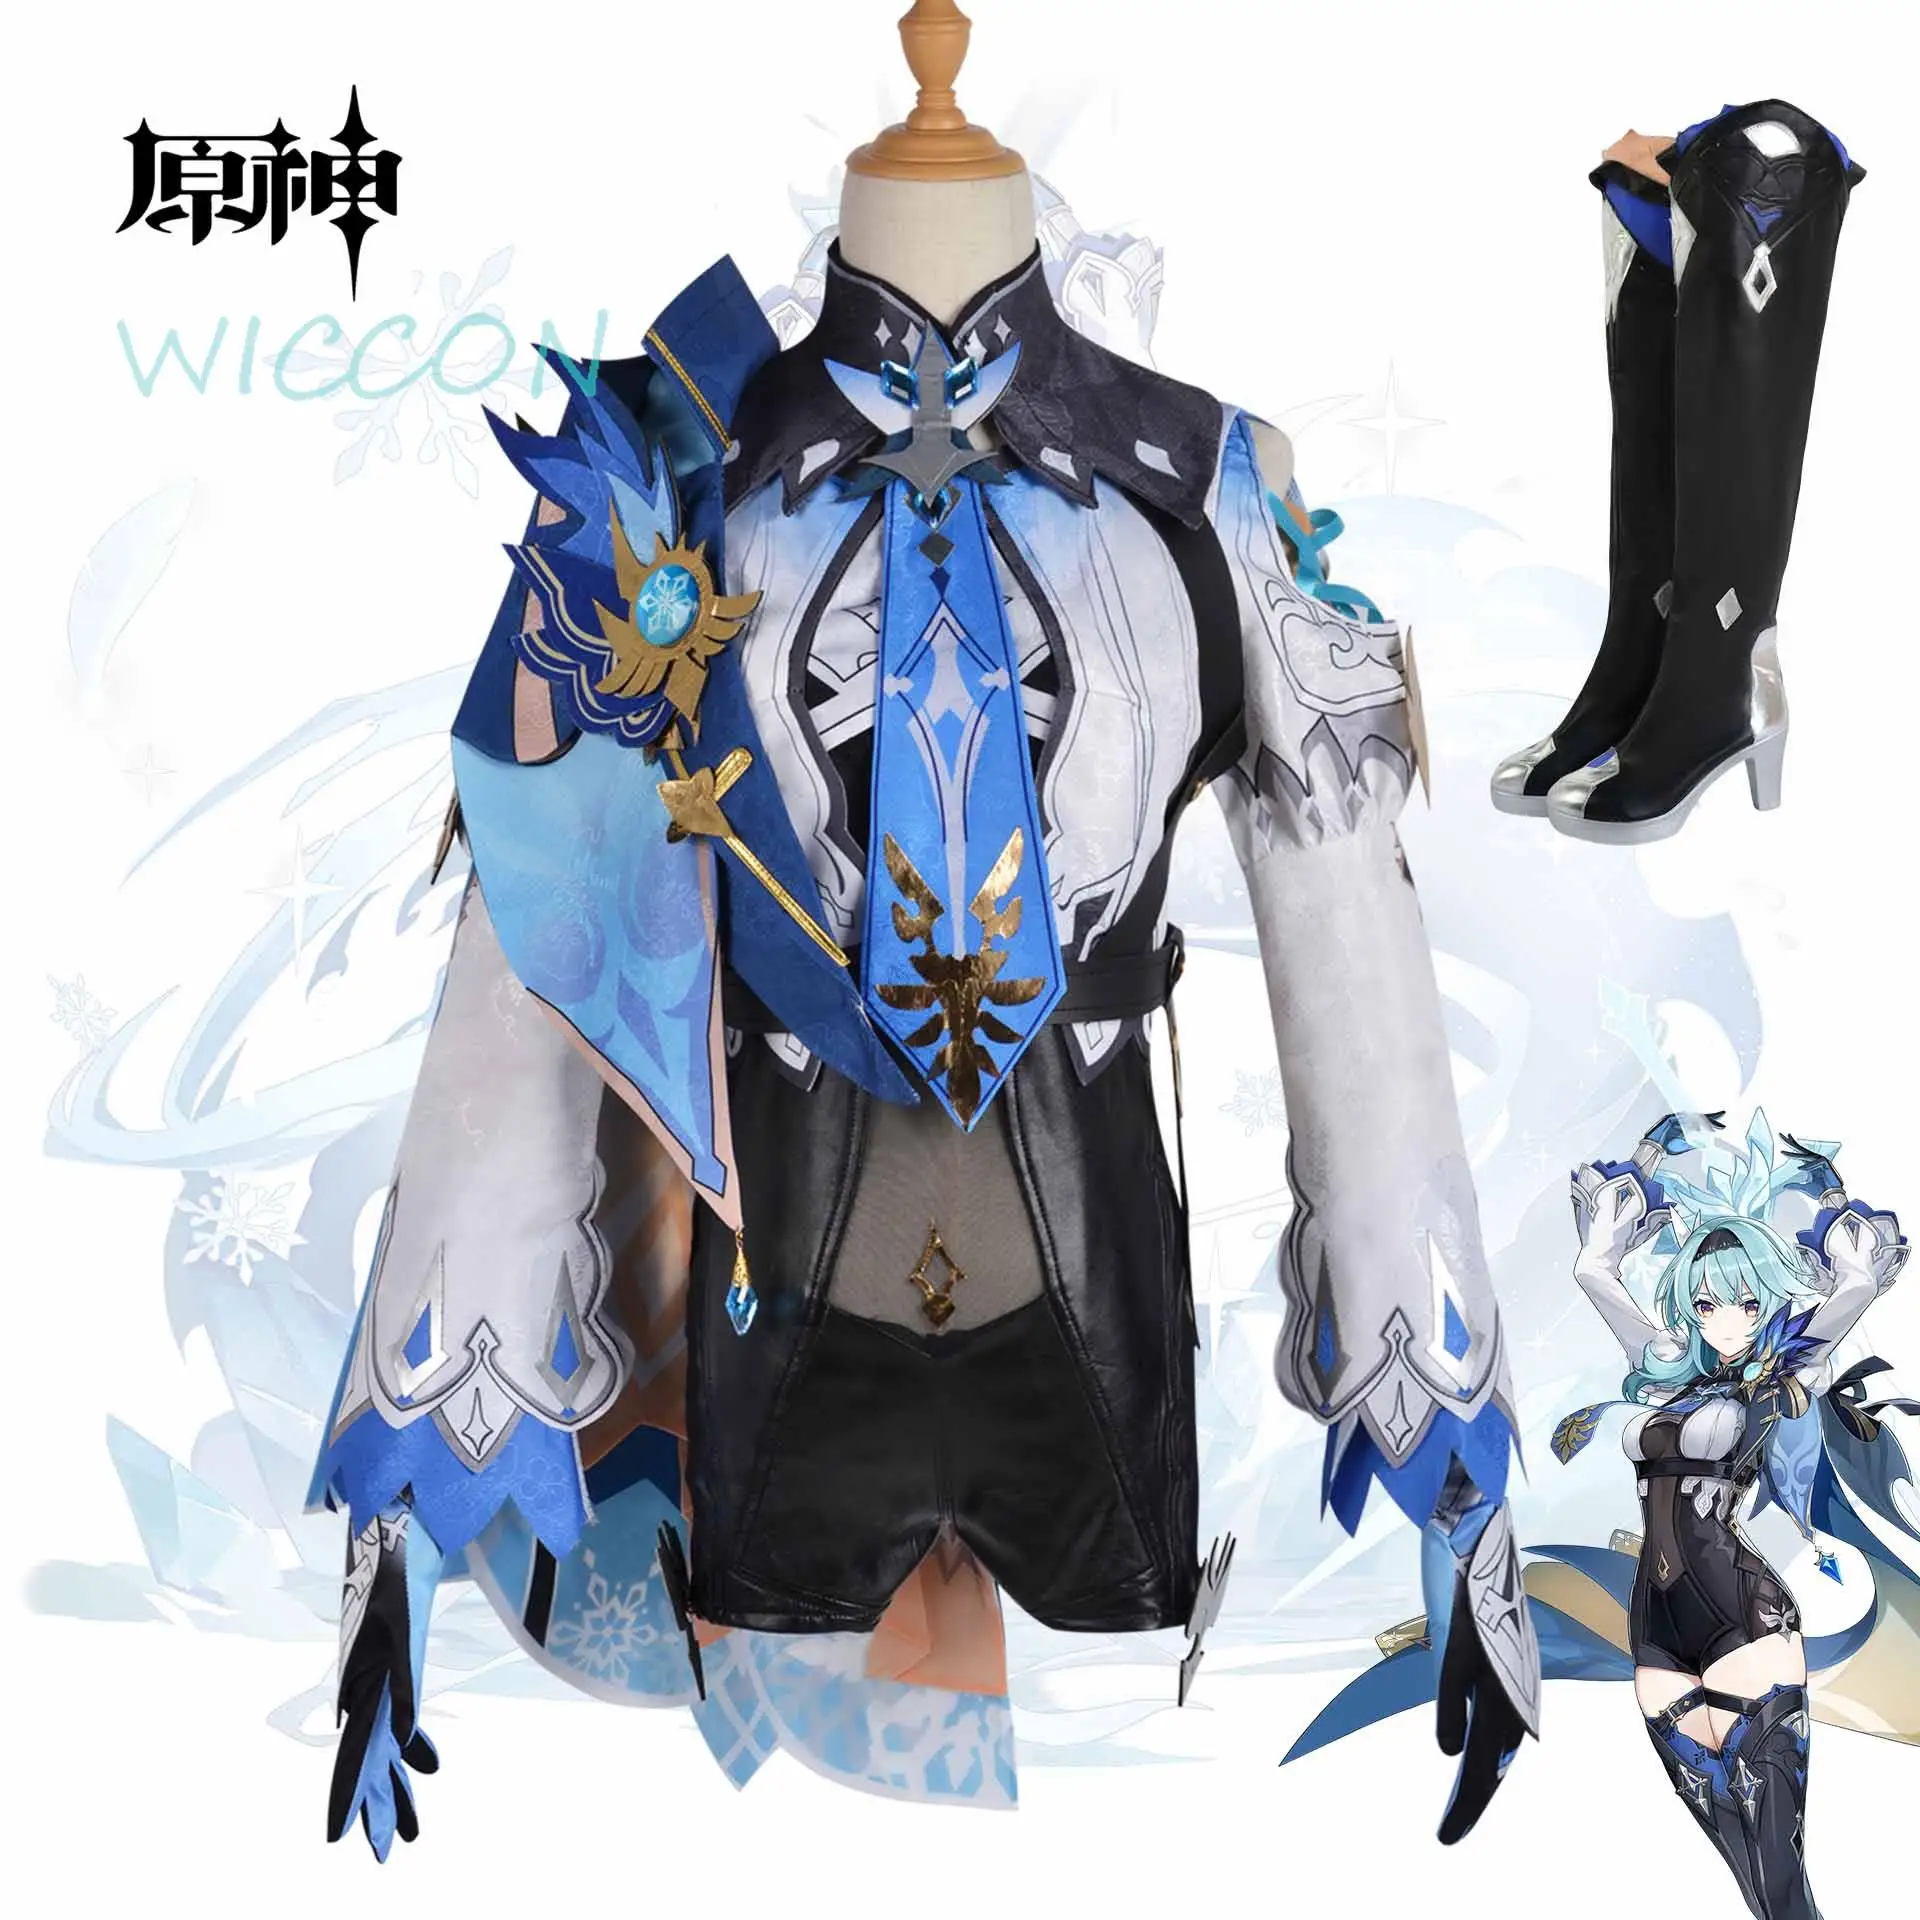 

Anime Game Genshin Impact Eula Cosplay Costume Uniform Cosplay Costume Women Halloween Party Outfit Game Suit Lovely Jumpsuits